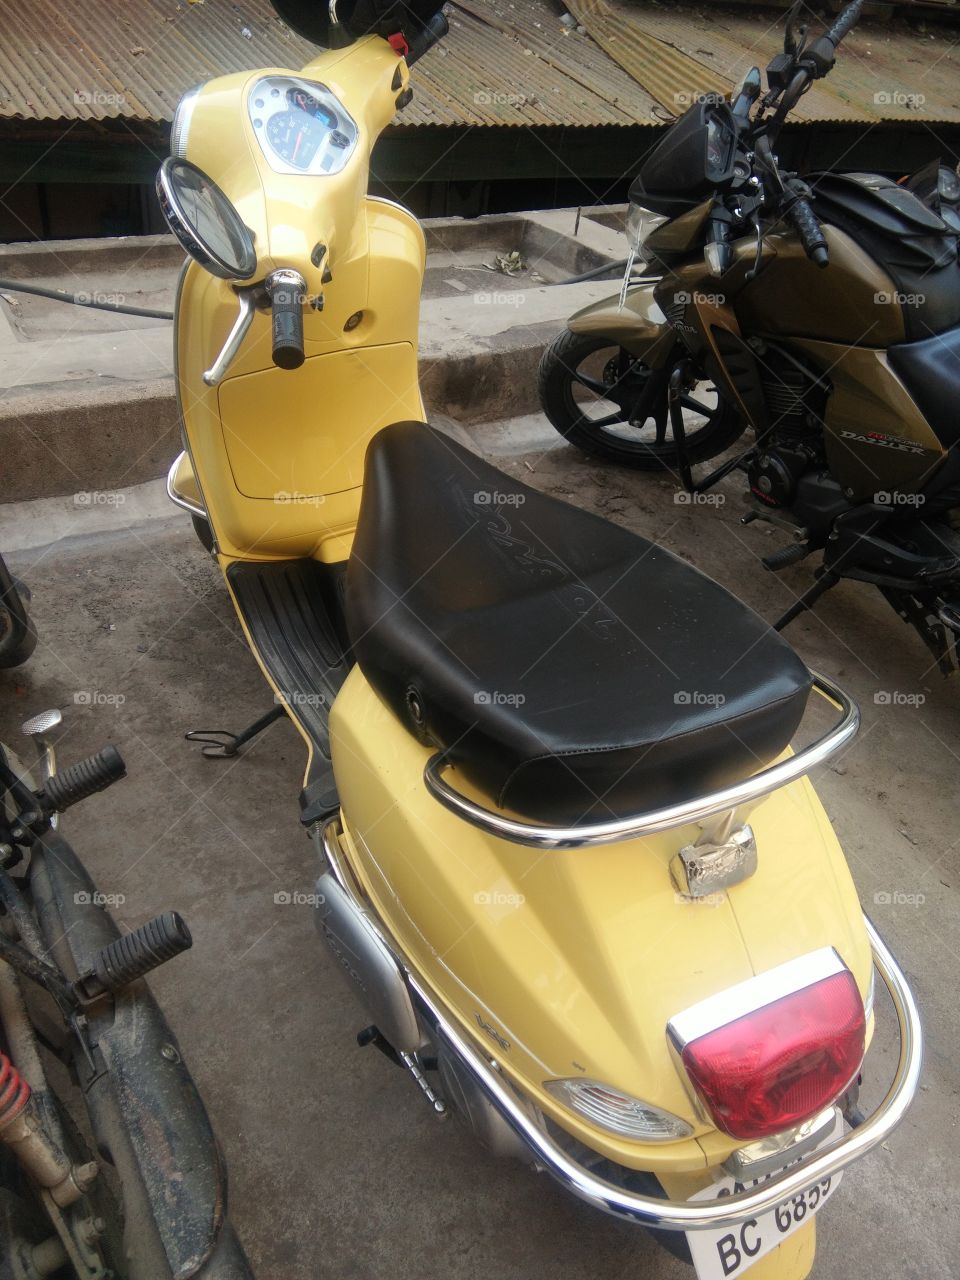 Two wheeler yellow vehicle parked outside the building..